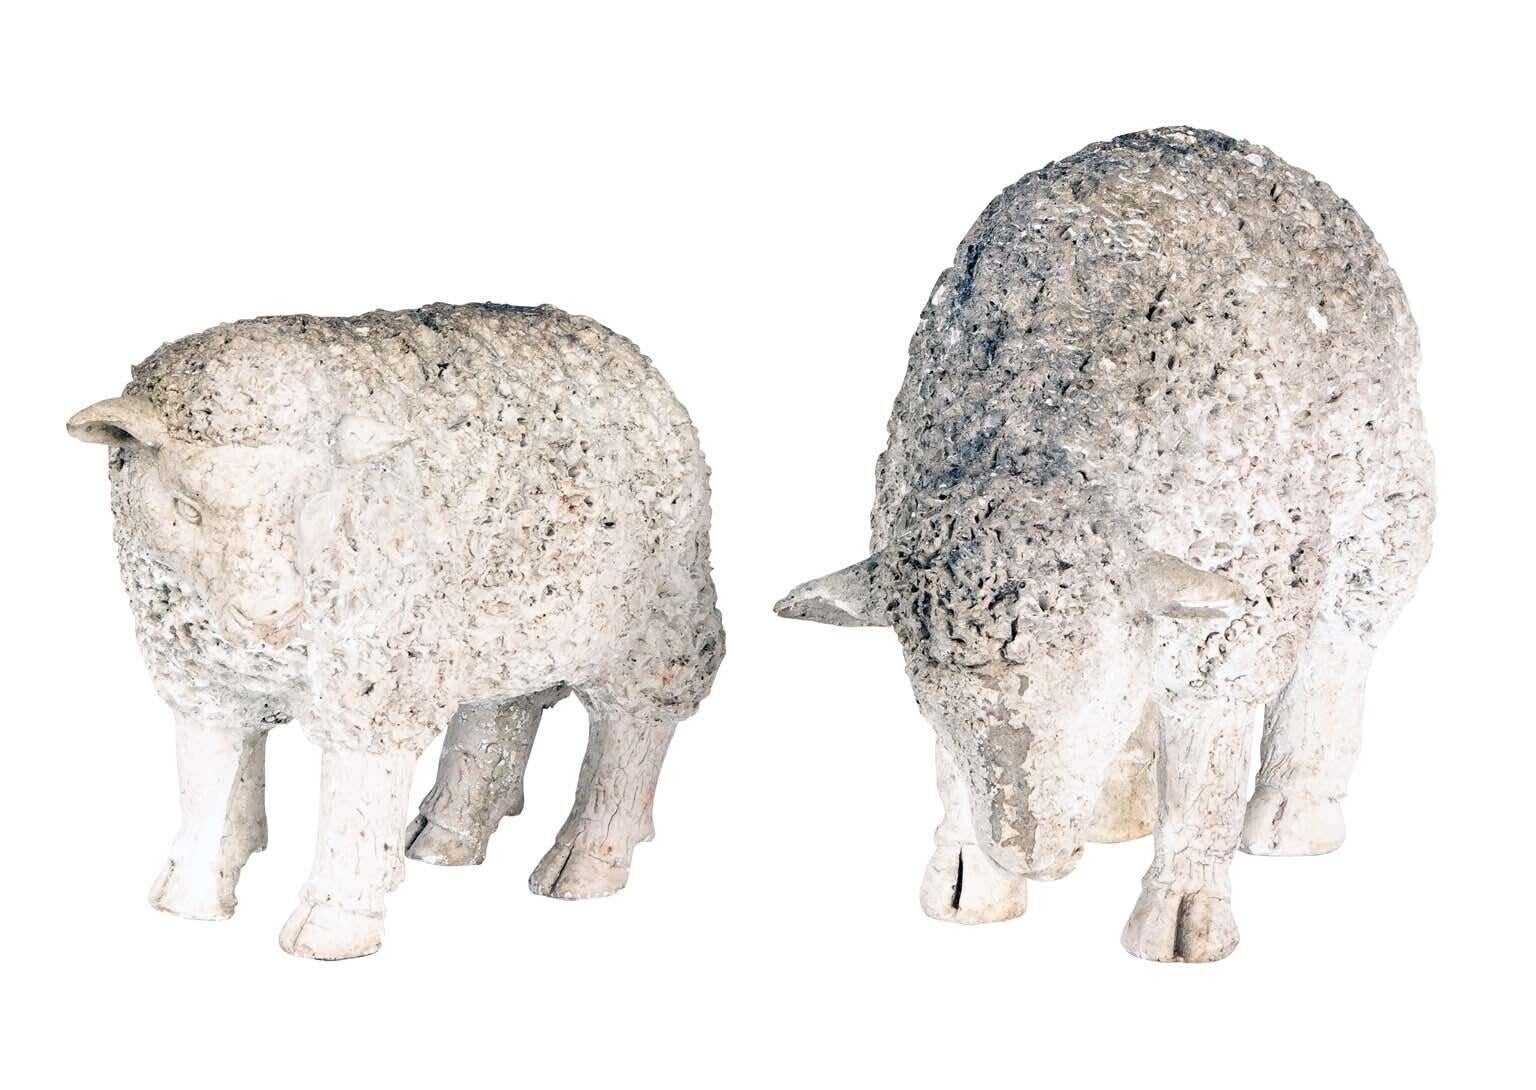 Elevate your garden with the charm of English mid 20th Century design through this delightful pair of sheep table top or garden ornaments. Crafted with meticulous attention to detail, each sheep embodies a whimsical touch while boasting lightweight